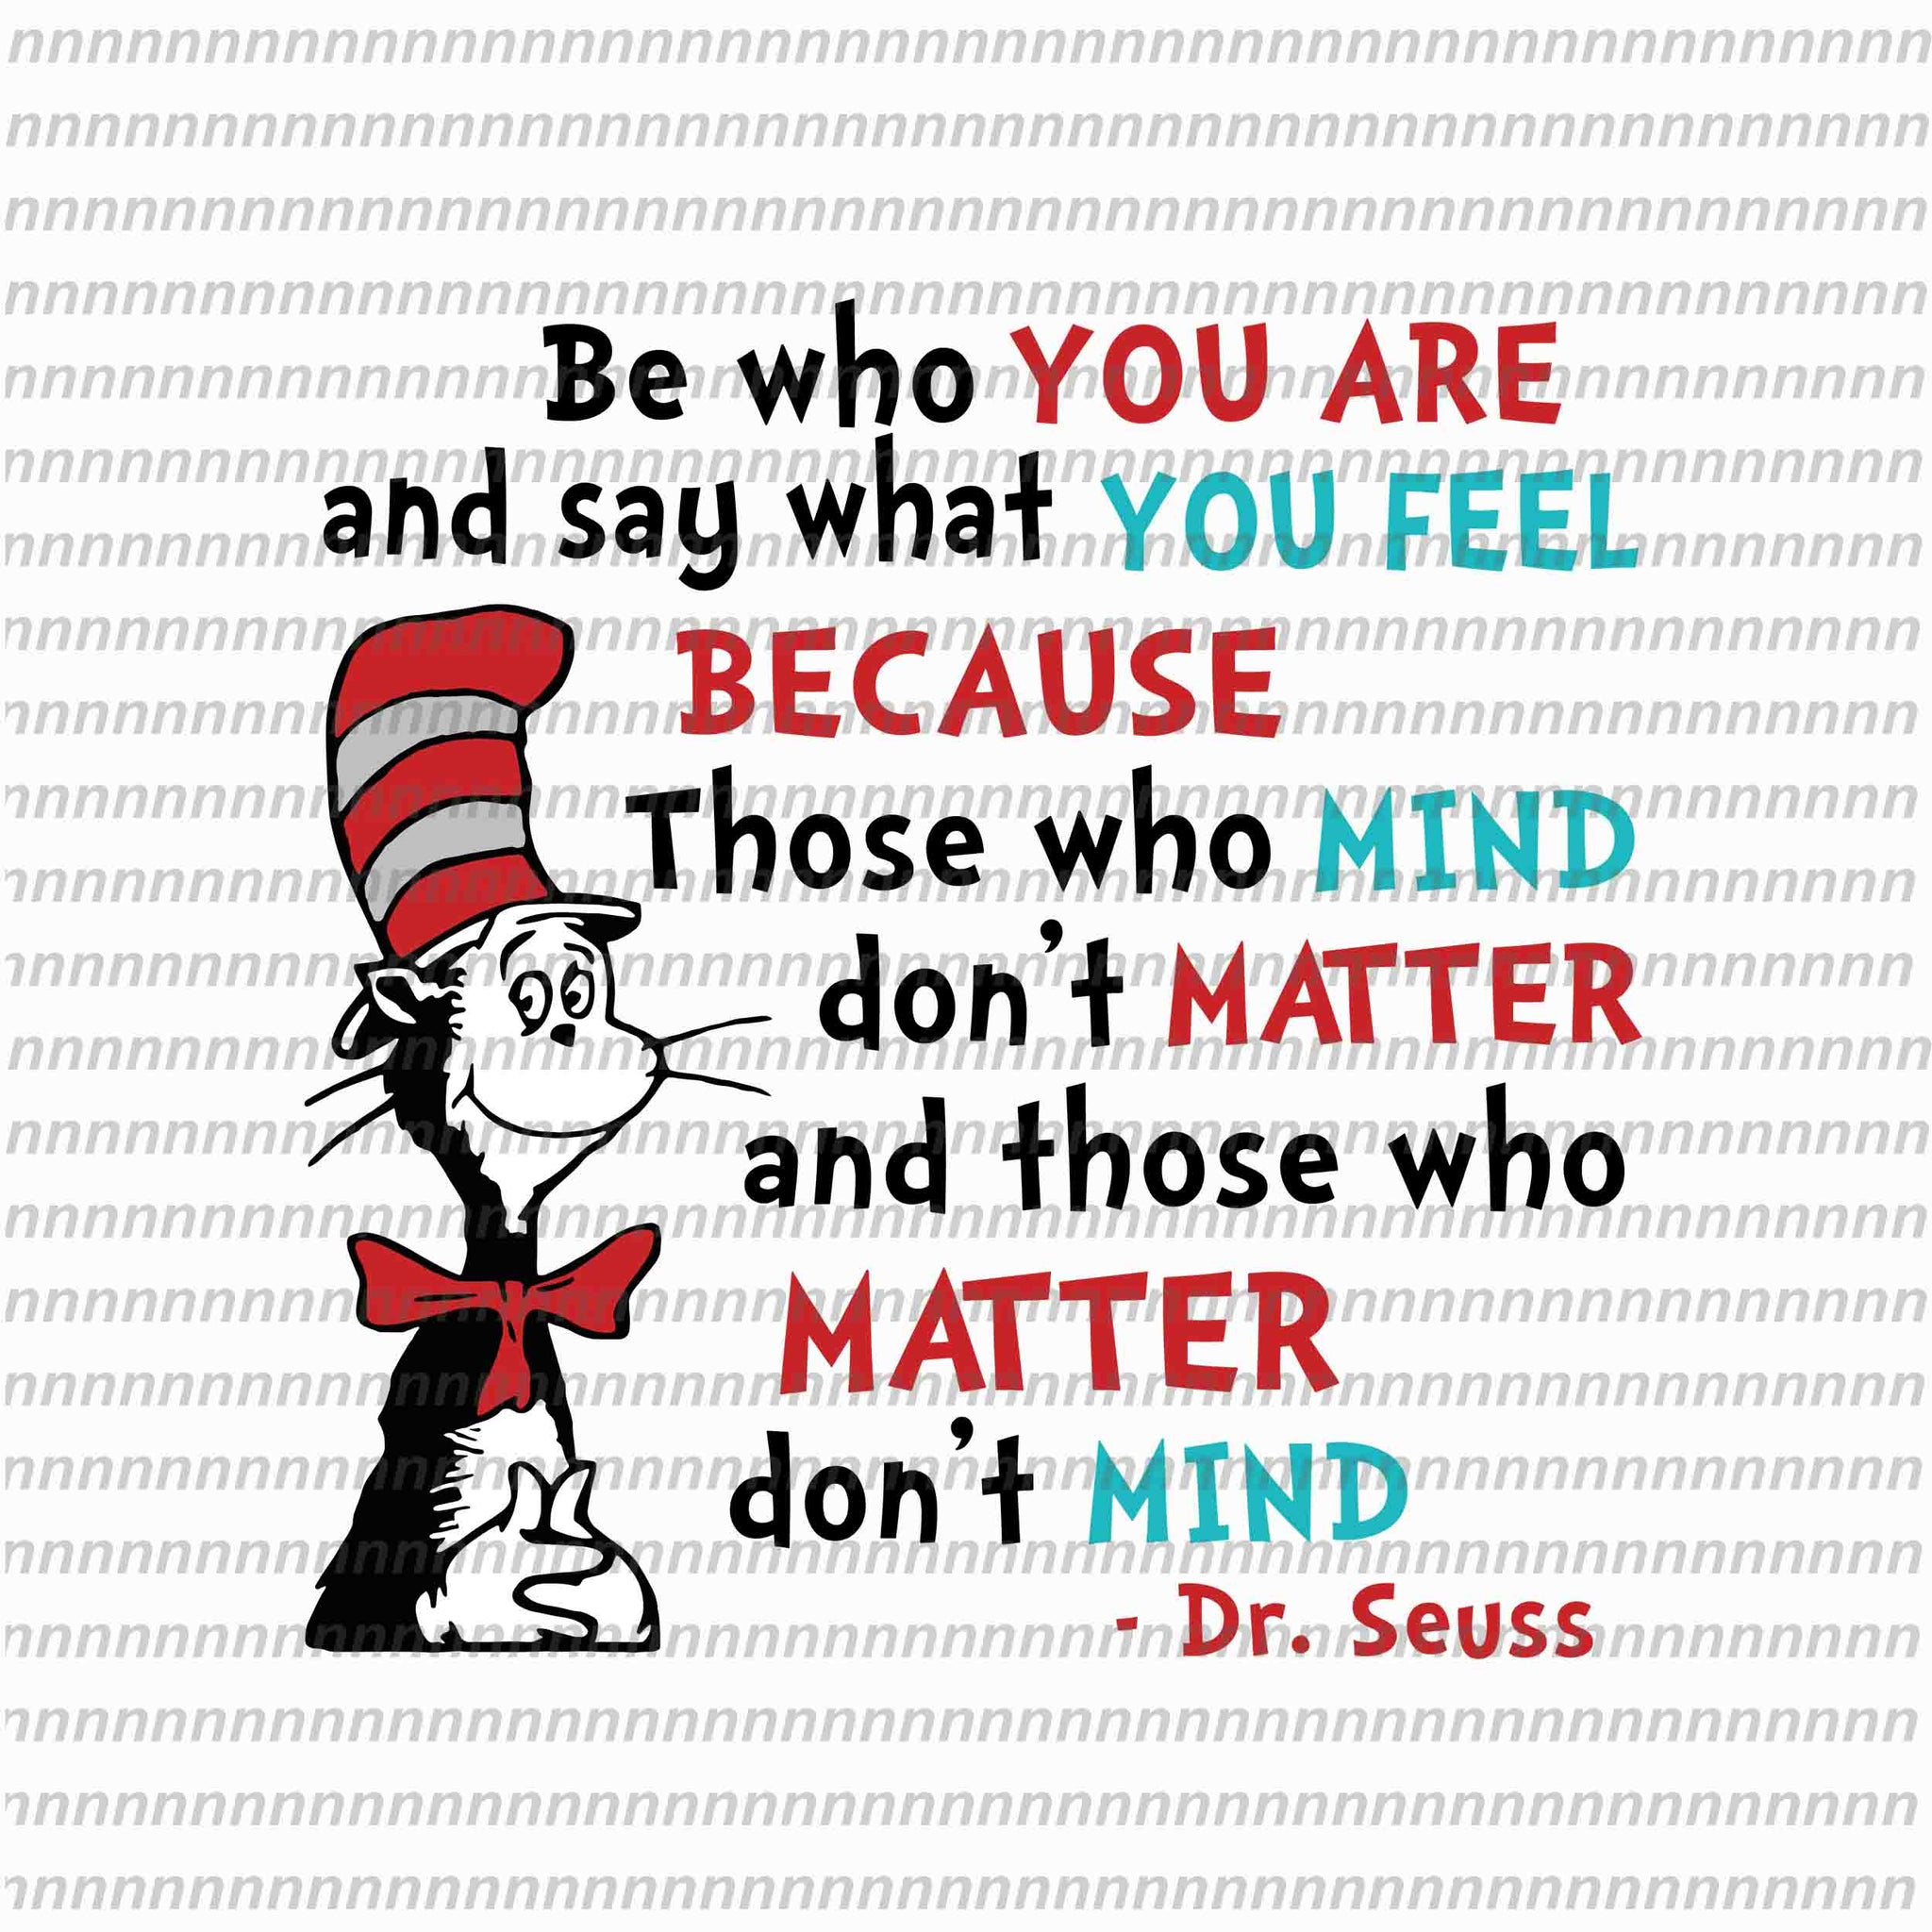 Be who you are and say what you feel, dr seuss svg, dr seuss quote, dr seuss design, Cat in the hat svg, thing 1 thing 2 thing 3, svg, png, dxf, eps file